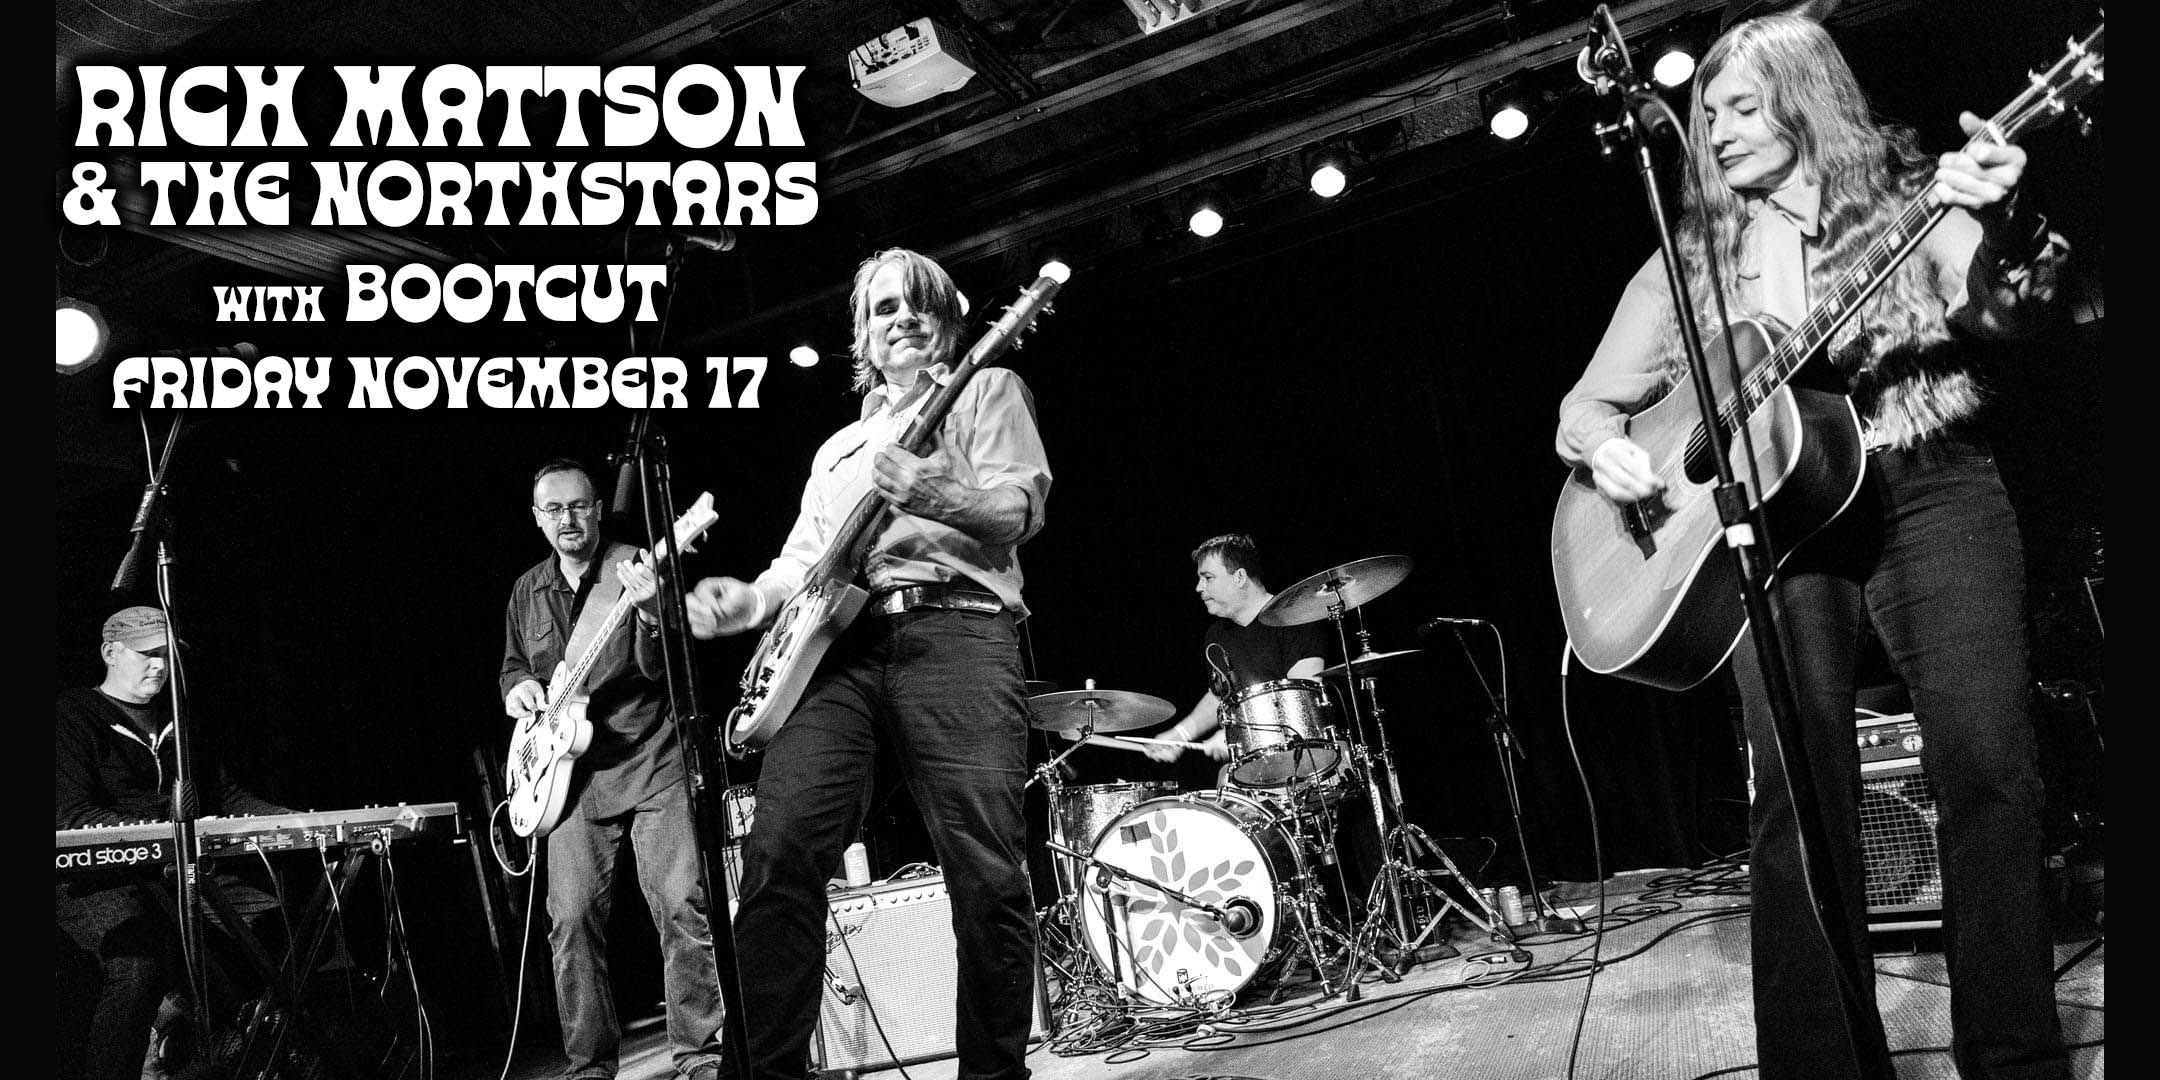 Rich Mattson and The Northstars with Bootcut Friday November 17 Mission Room at The Hook Doors 7:30pm :: Music 8:00pm :: 21+ General Admission * $15 ADV / $20 DOS * Does not include fees NO REFUNDS